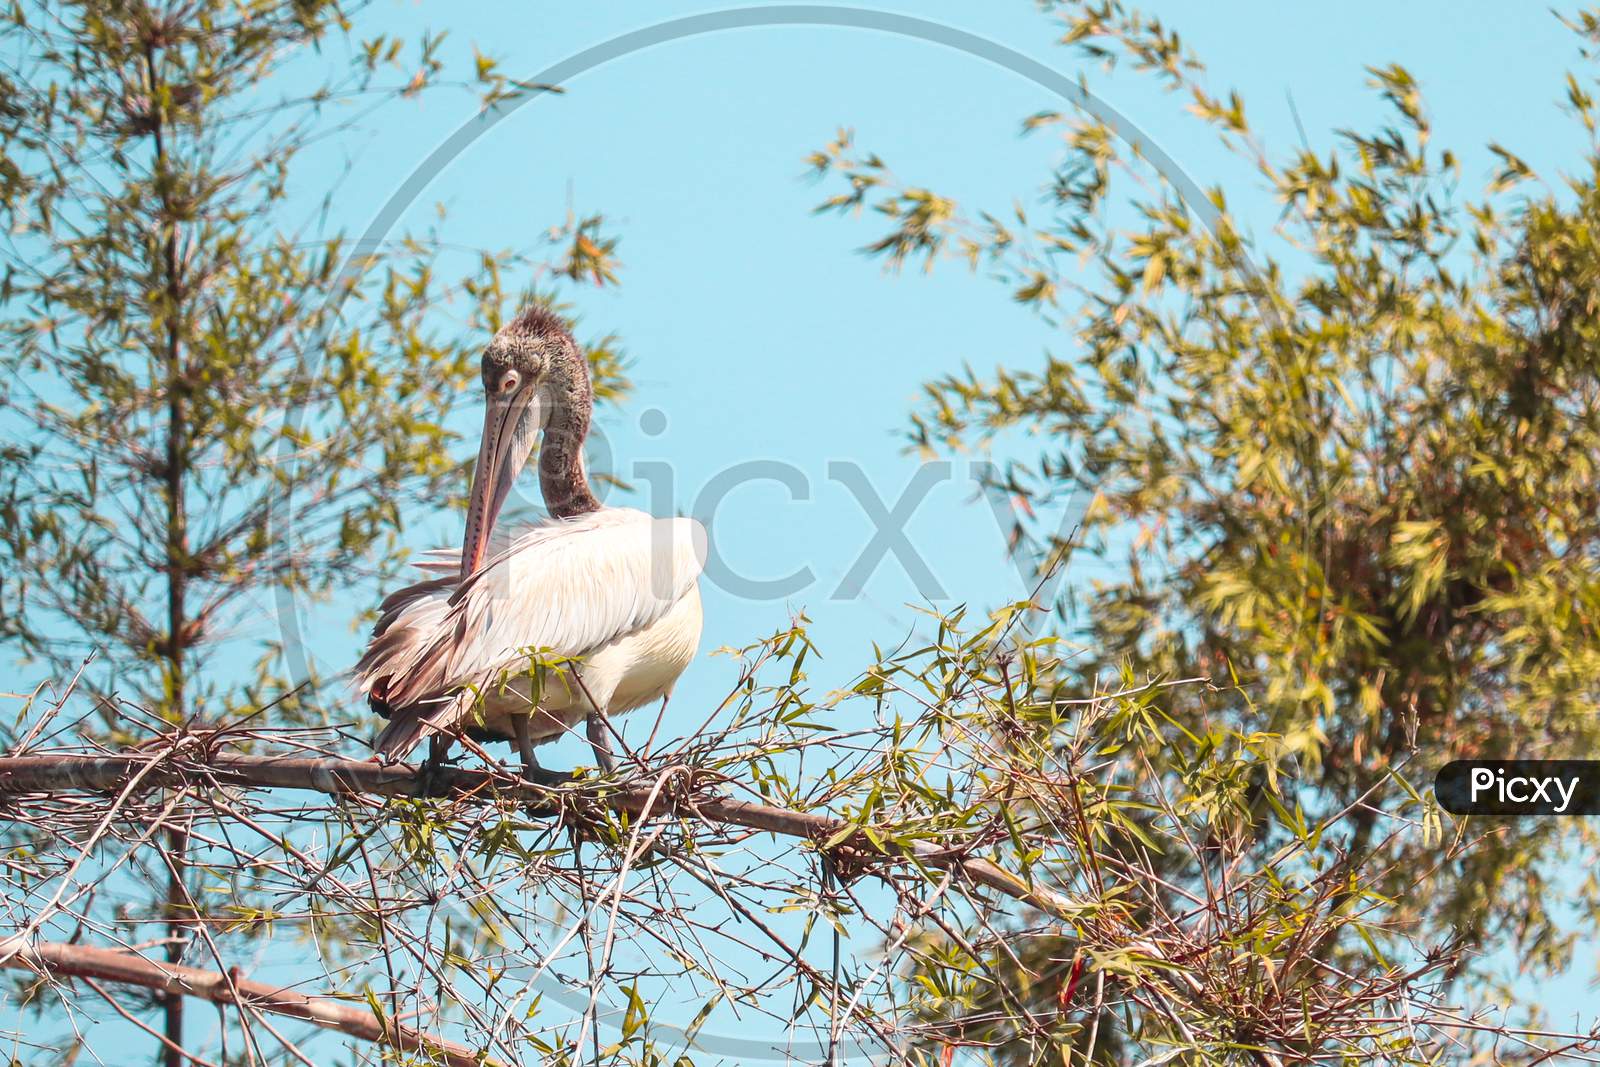 THIS IS A PHOTO OF ASIAN OPENBILL